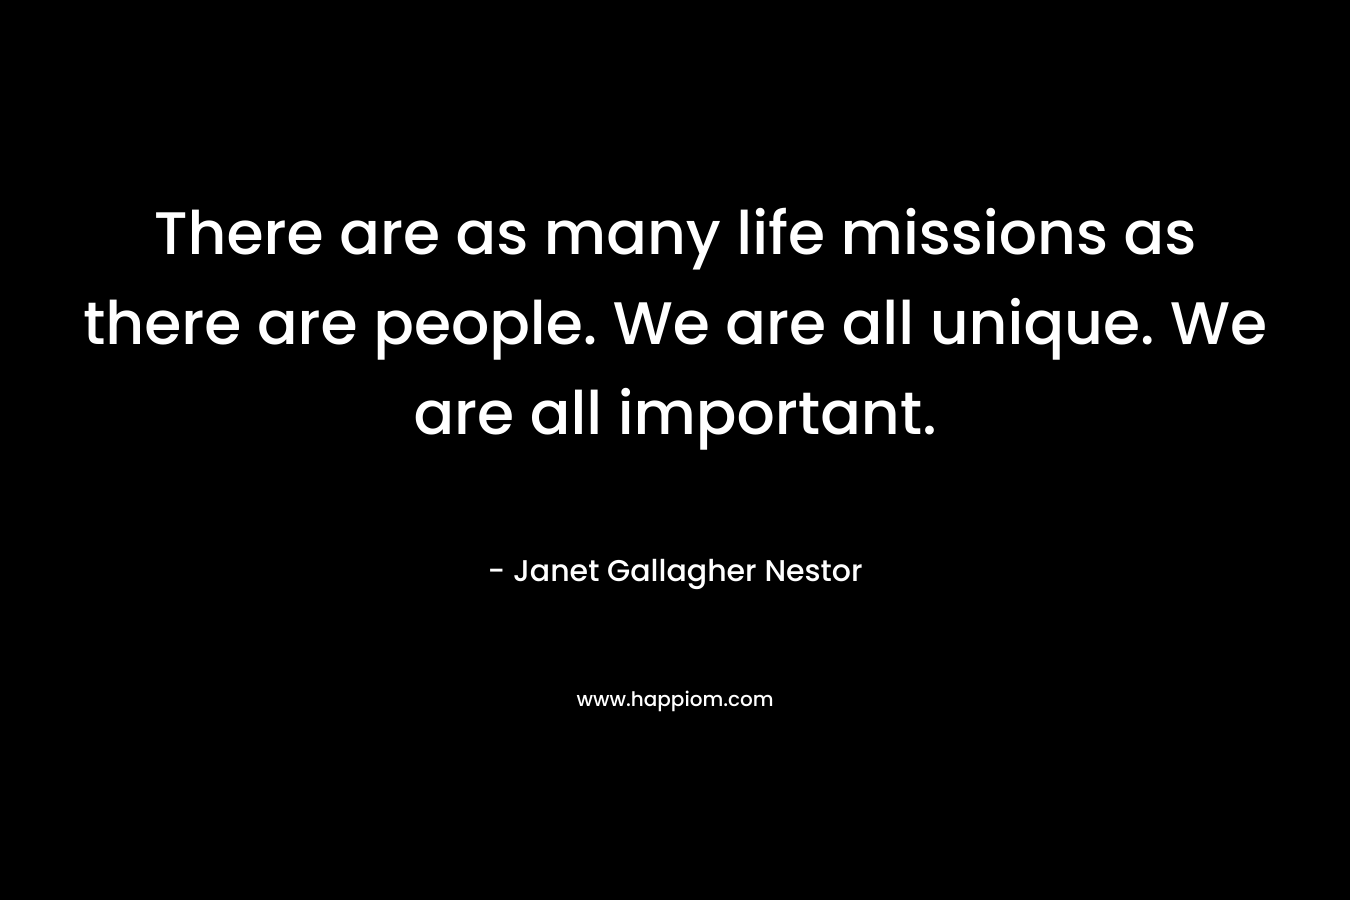 There are as many life missions as there are people. We are all unique. We are all important.